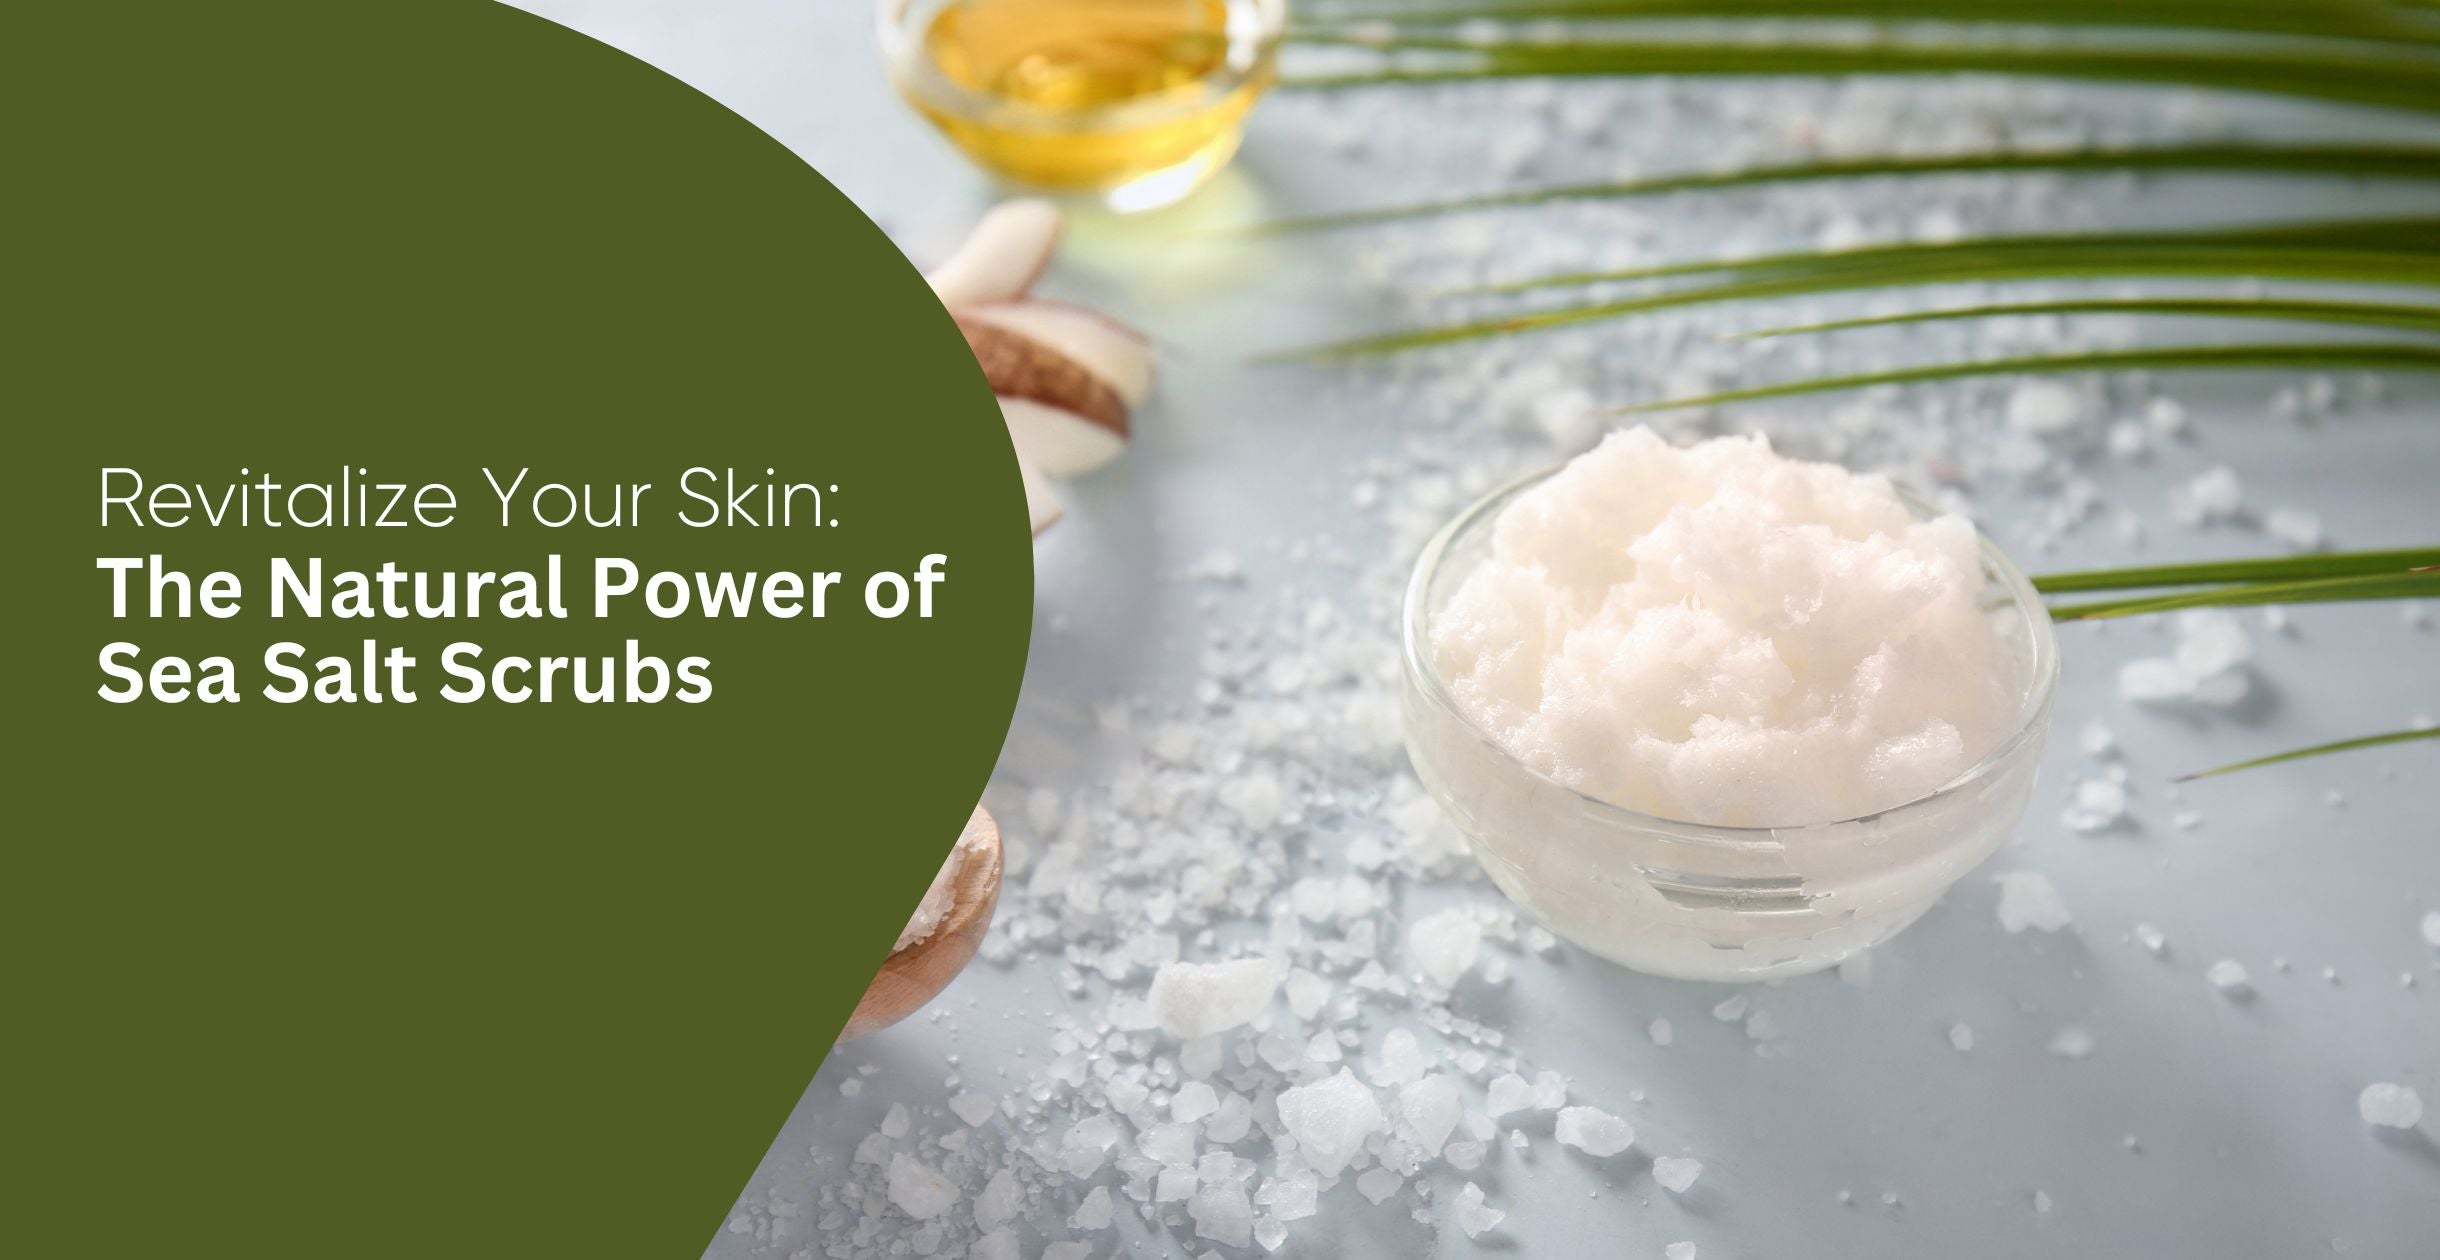 Revitalize Your Skin: The Natural Power of Sea Salt Scrubs